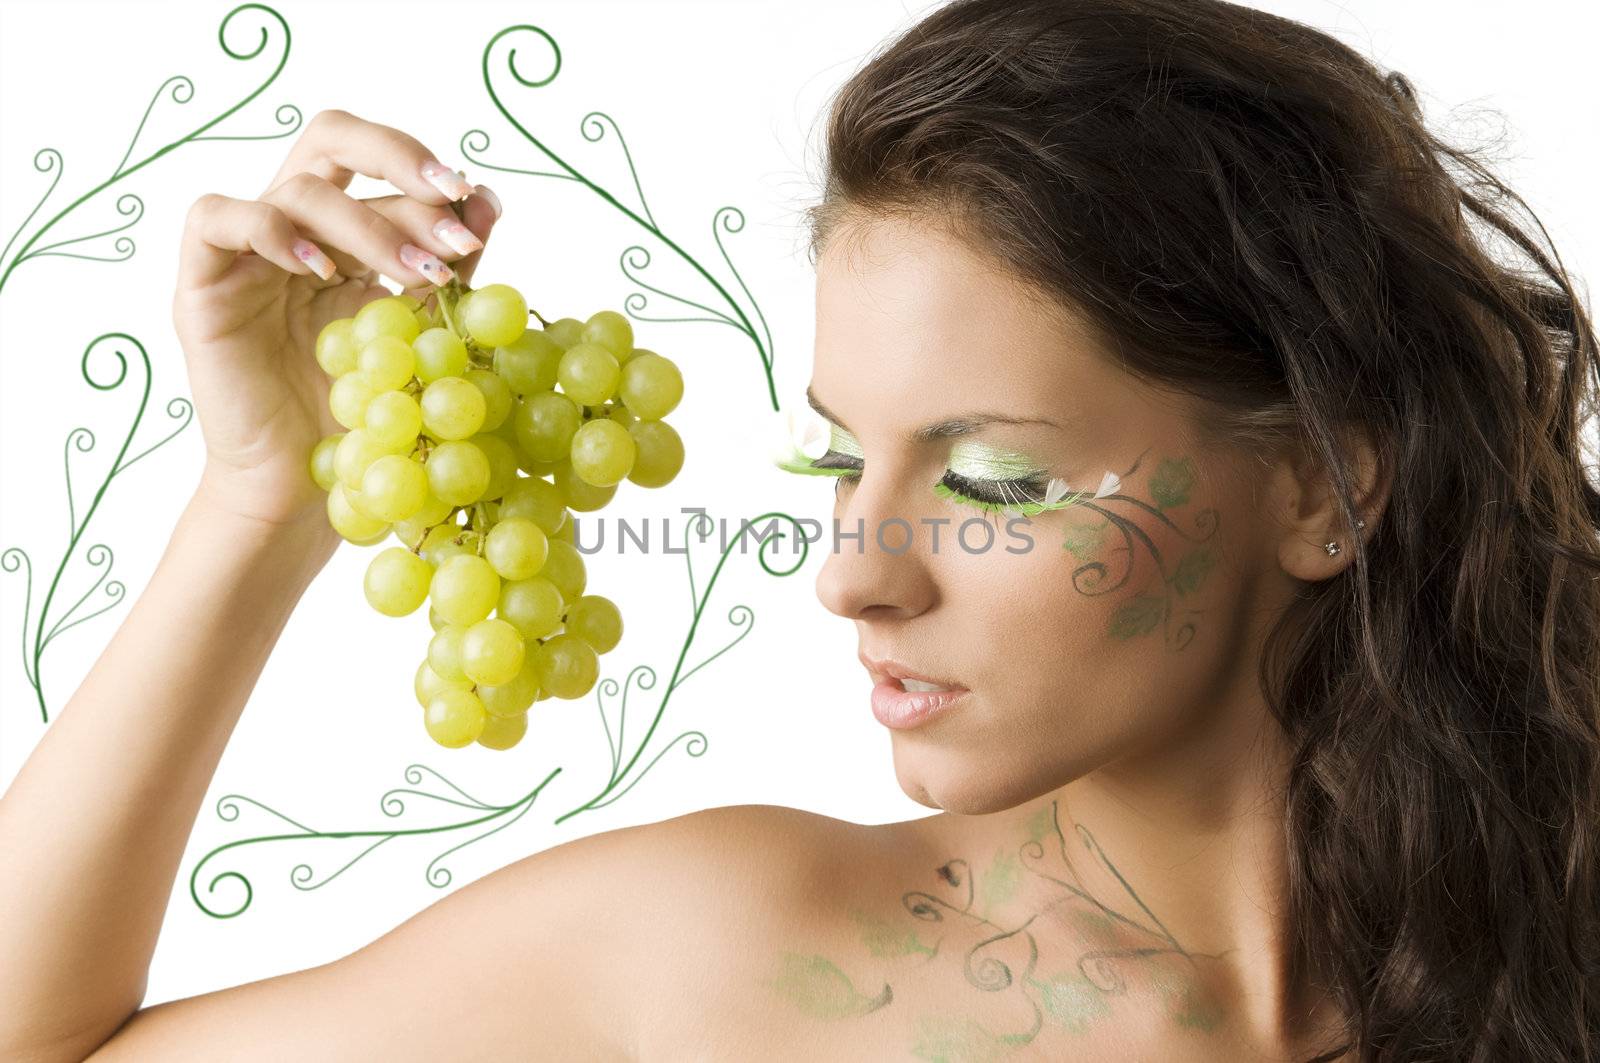 nice brunette with bodypaint and green eyelashes looking a grape